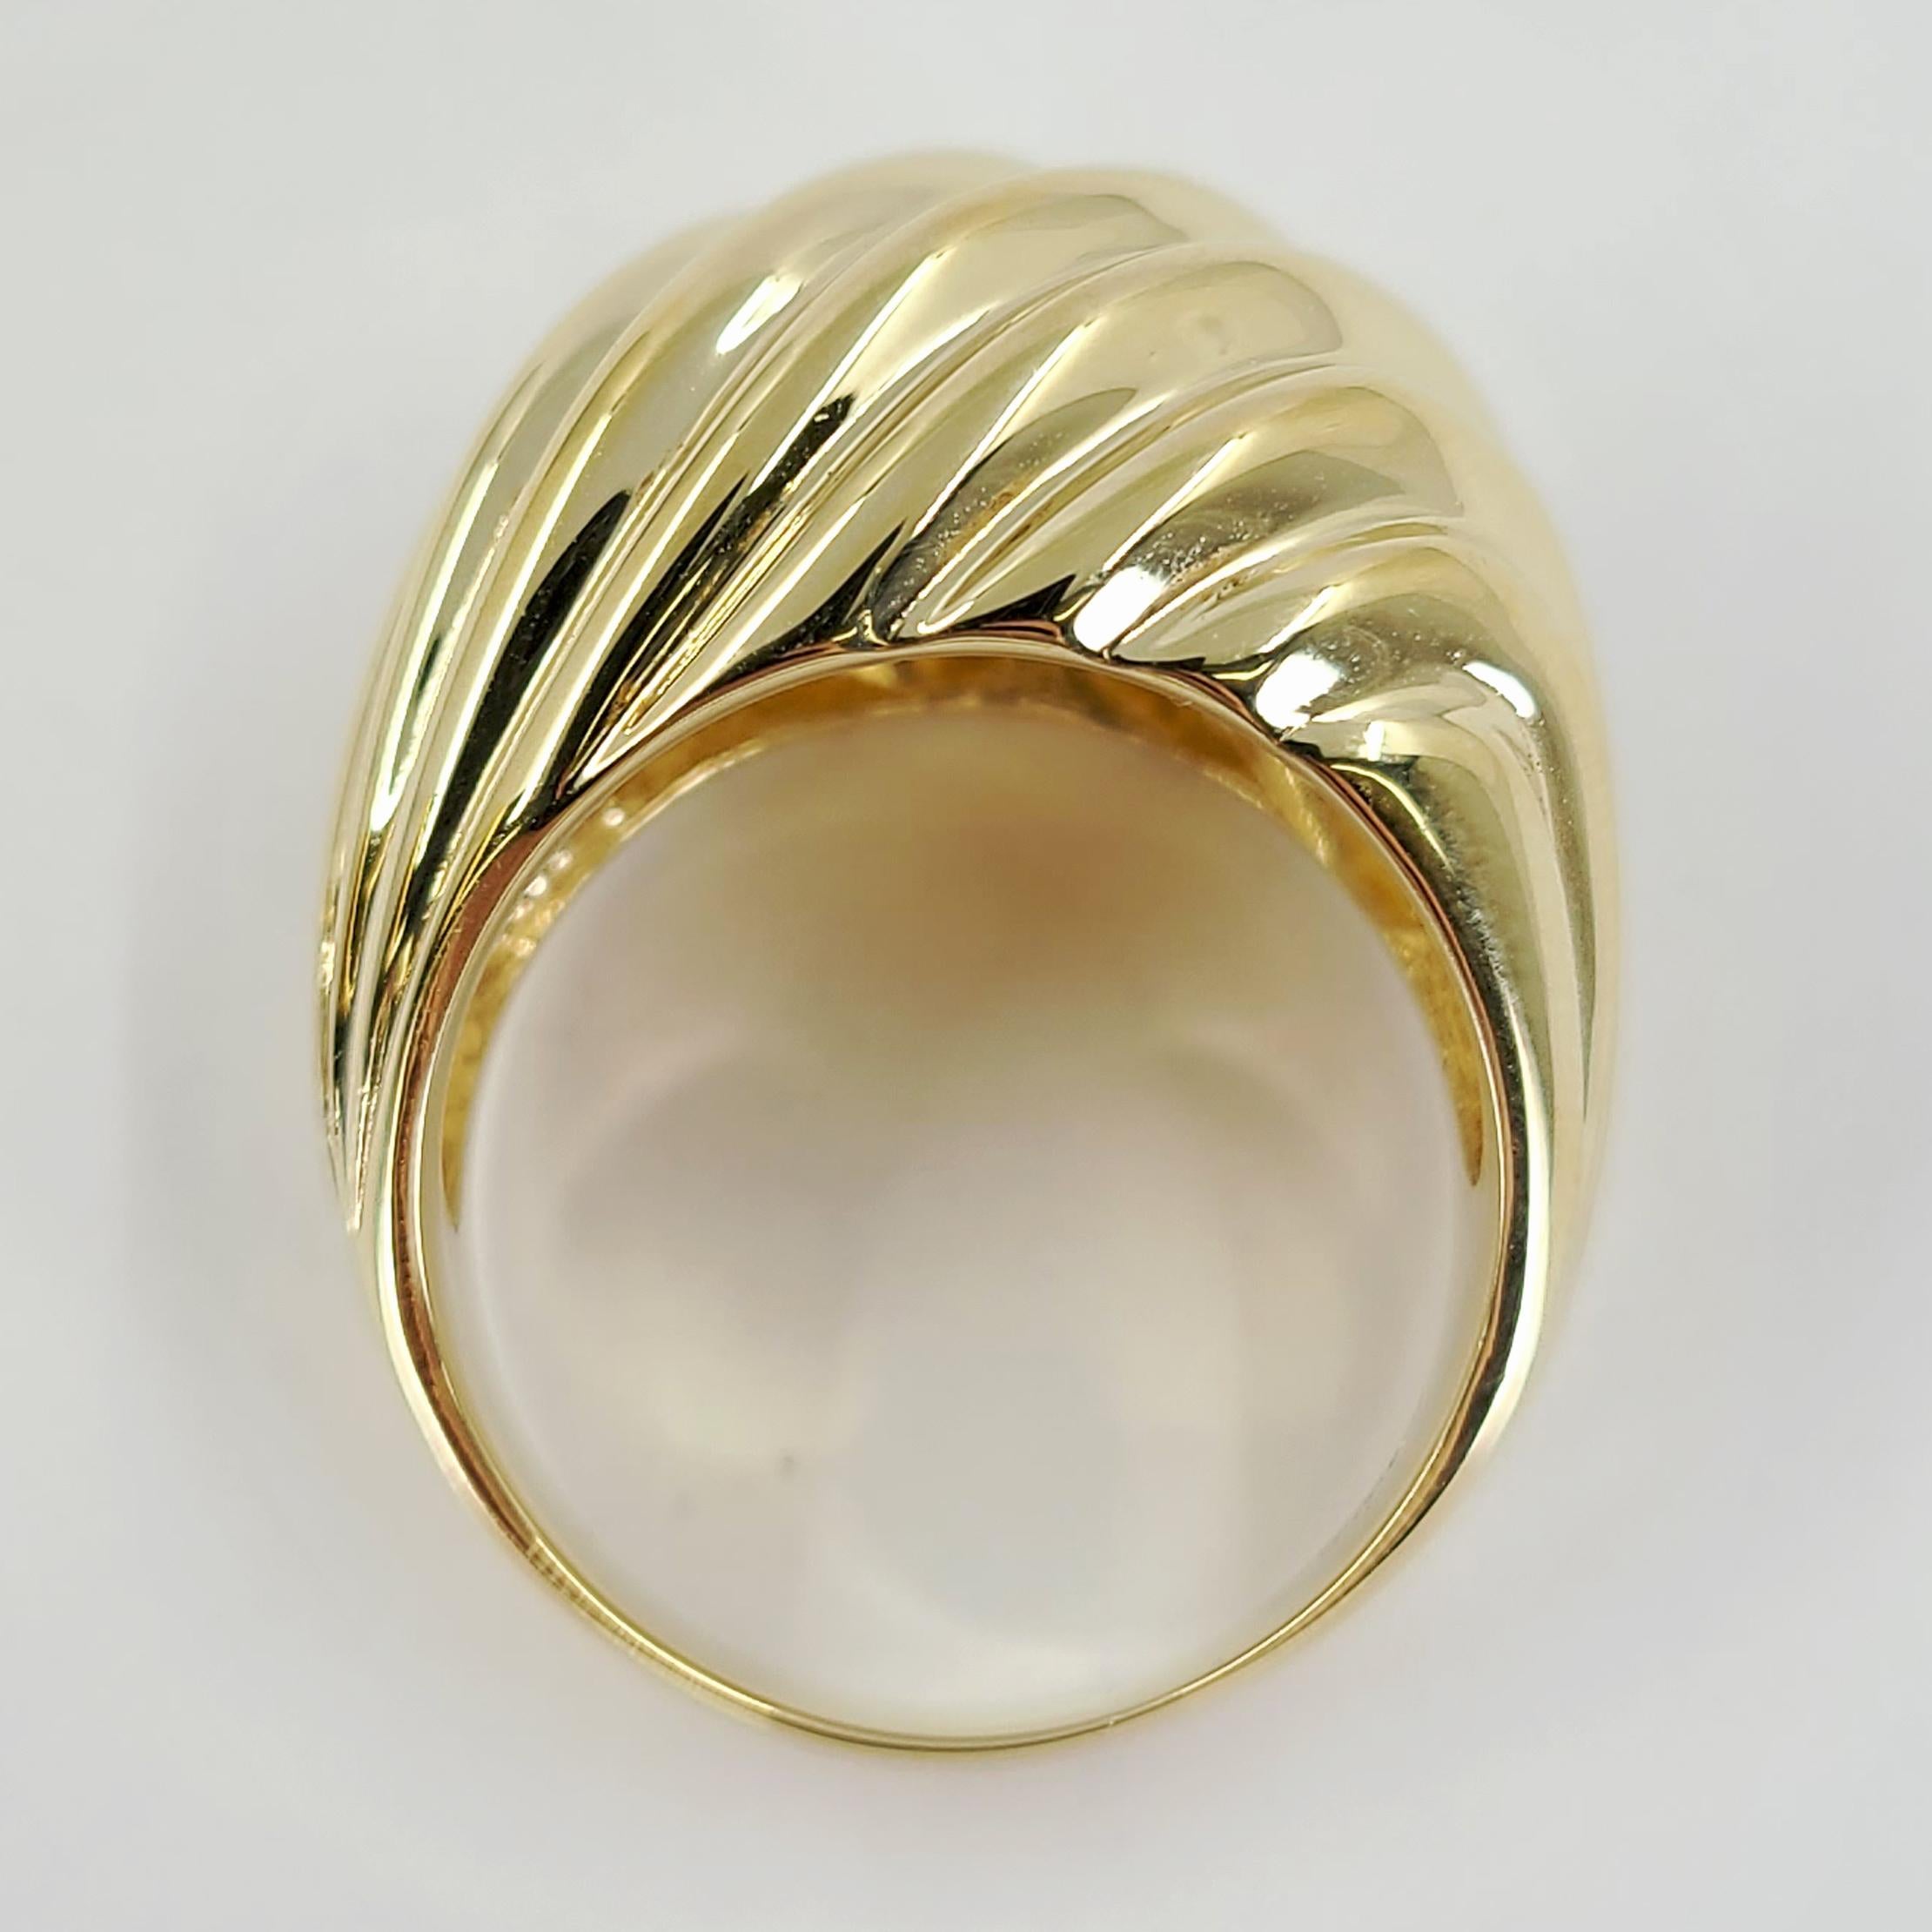 14 Karat Yellow Gold Ring Featuring A Domed Wave Design. Finished Weight Is 11.7 Grams. Finger Size 7.25; Purchase Includes One Sizing Upon Request.